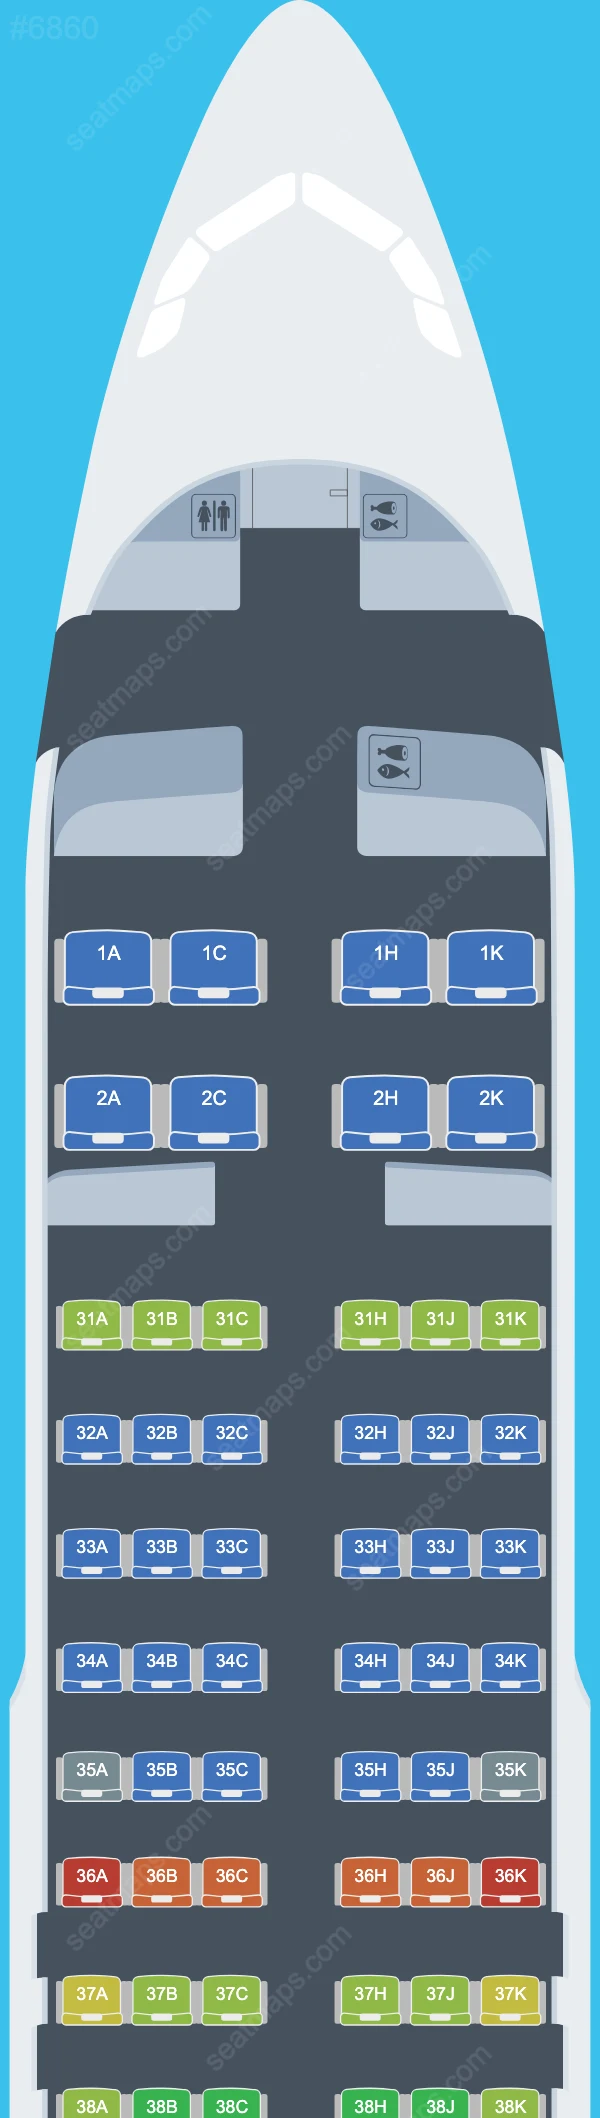 Chongqing Airlines Airbus A320 aircraft seat map  A320-200